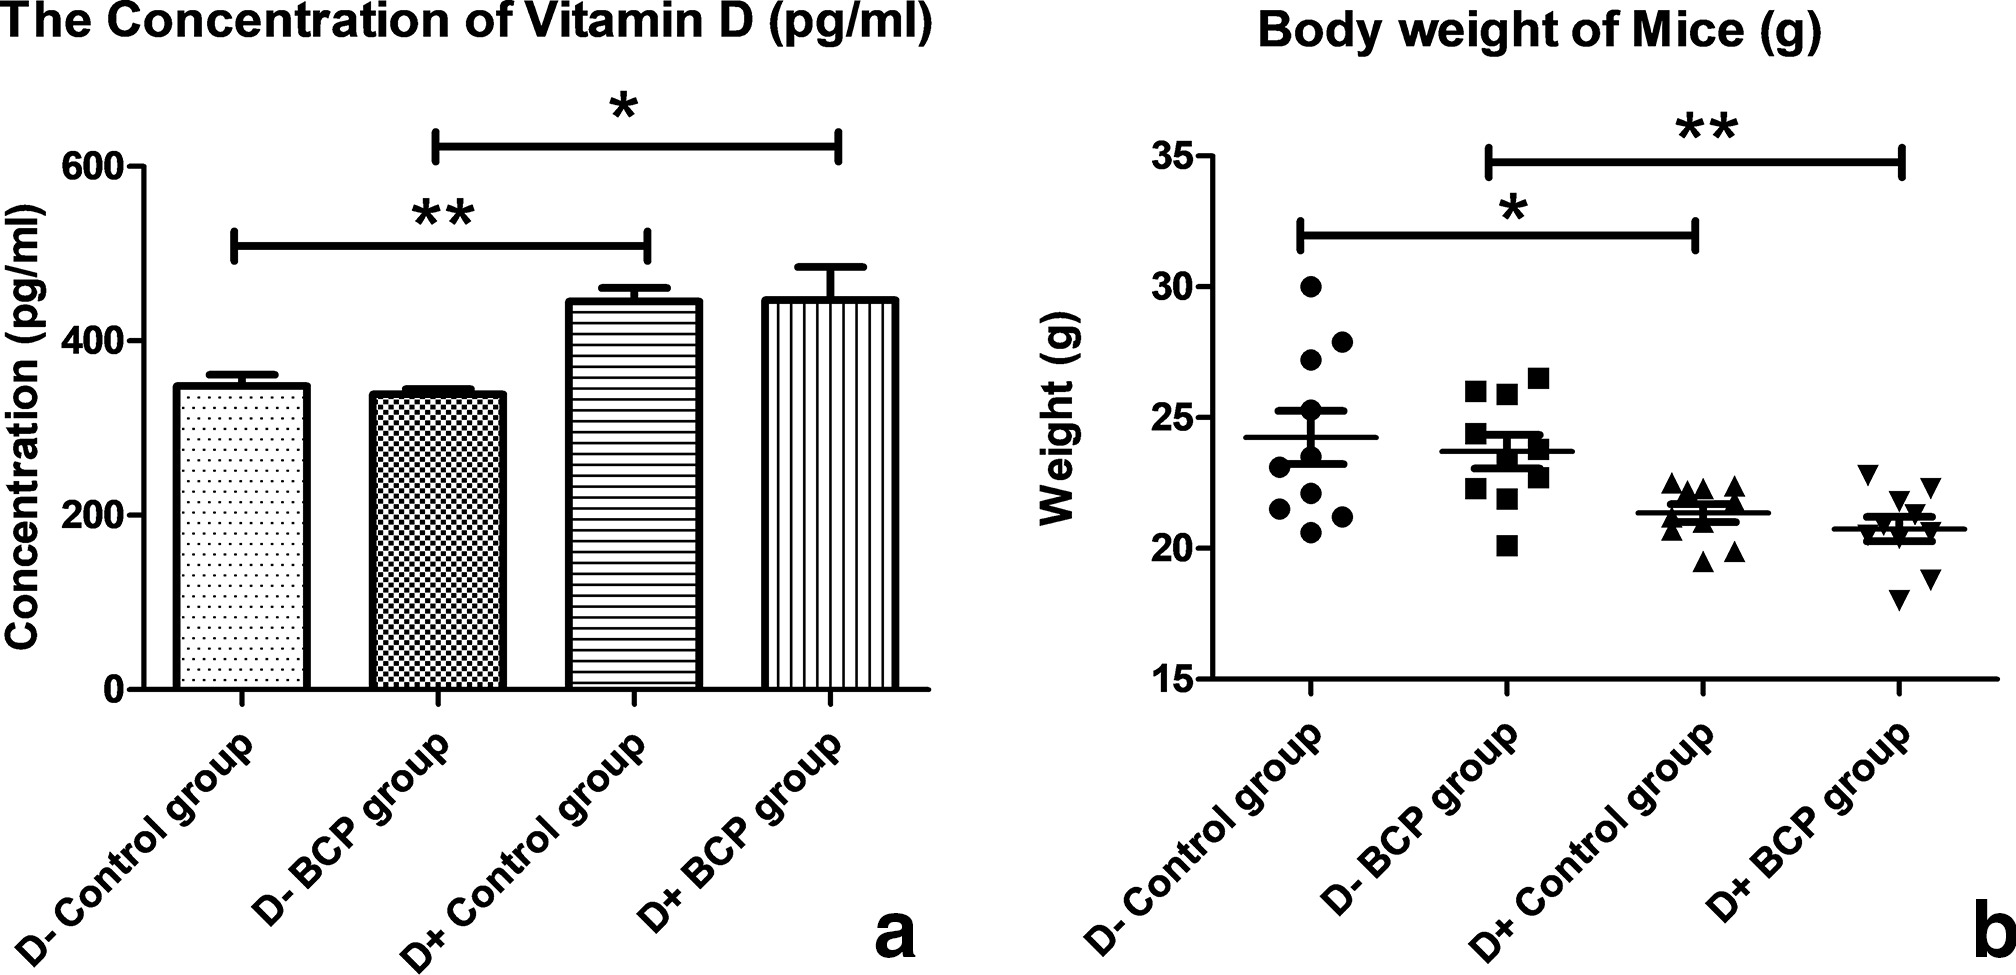 Fig. 1 
            Vitamin D-deficient diet led to decreased serum concentration of 25(OH)D3 in mice and increased body weight. The mice were given a diet that contained vitamin D (VD+) or lacked vitamin D (VD-) and were treated five days/week for two weeks with propylene glycol control, or with 100 μg/kg ß-caryophyllene (BCP) by oral gavage. a) Plasma 25(OH)D3 concentrations after treatment. Control groups: *p < 0.01; BCP groups: *p < 0.05. 25(OH)D3, 25-hydroxy vitamin D3, was used as a marker for vitamin D. b) Body weight after treatment. Control groups: *p < 0.05; BCP groups: *p < 0.01.
          